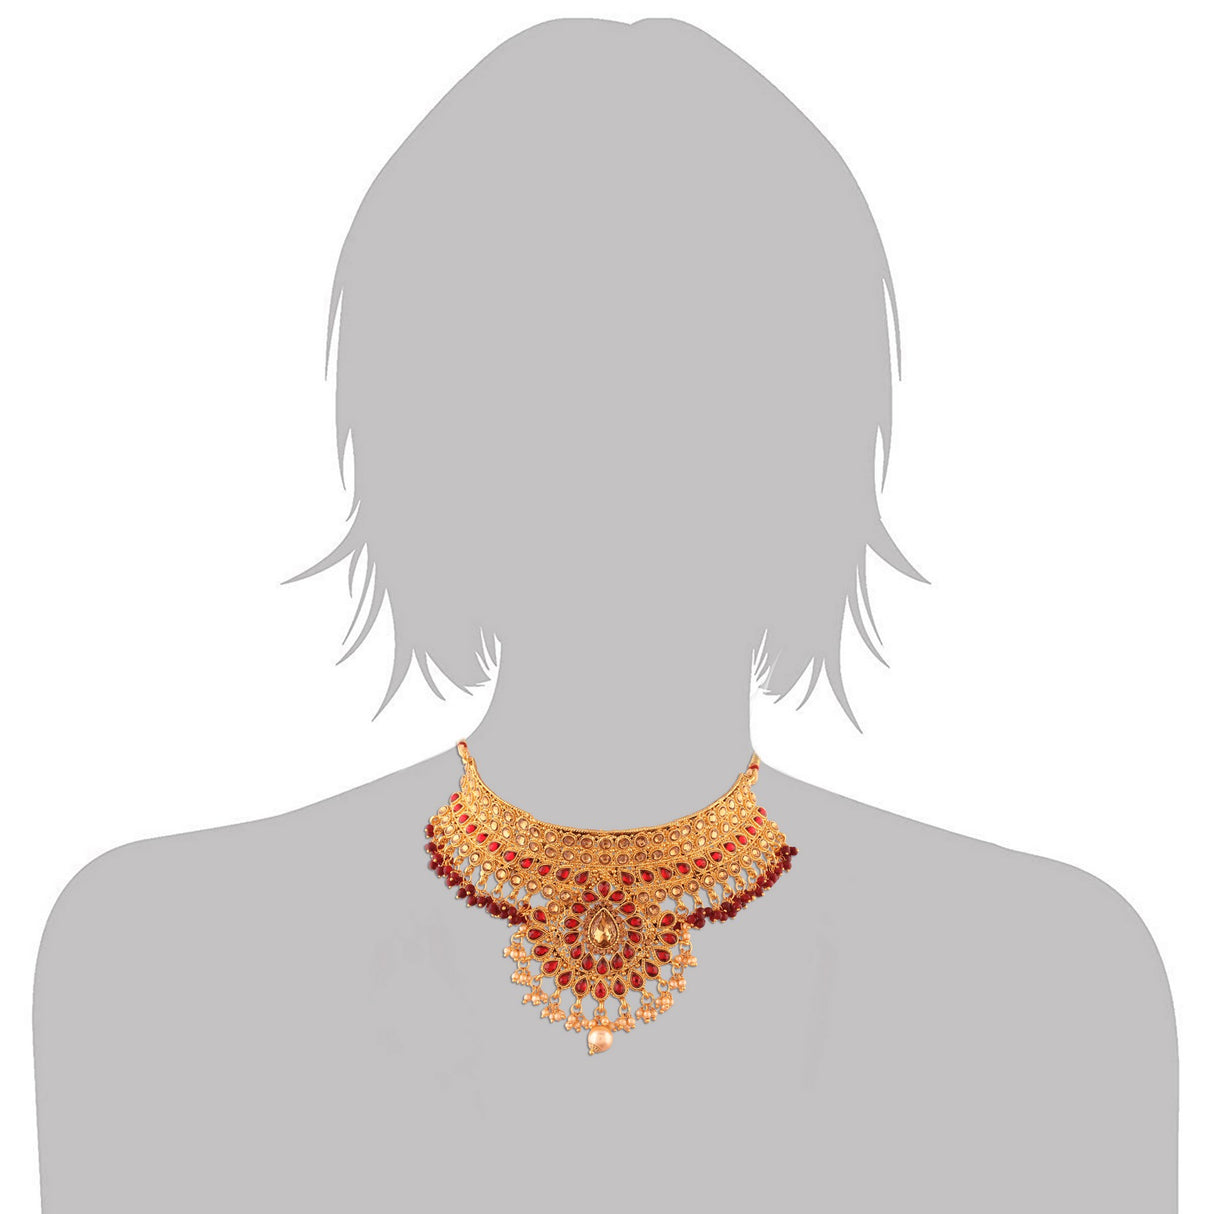 Alloy Choker Necklace Set with Maang Tikka in Red